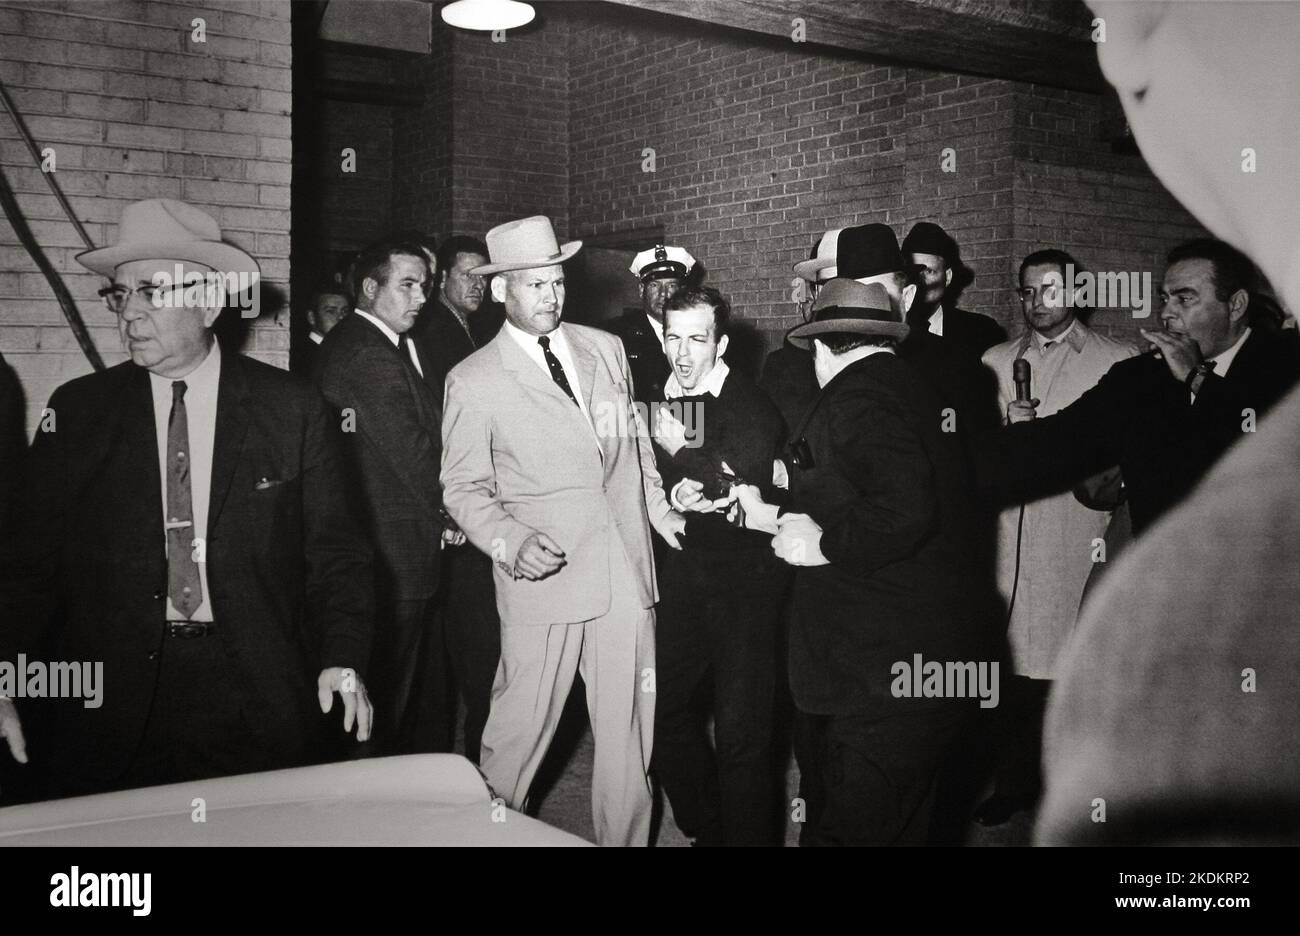 Jack Ruby (52) shoots Lee Harvey Oswald (24). Winner of the 1964 Pulitzer Prize for Photography - Author Robert H. Jackson - uncropped version Stock Photo